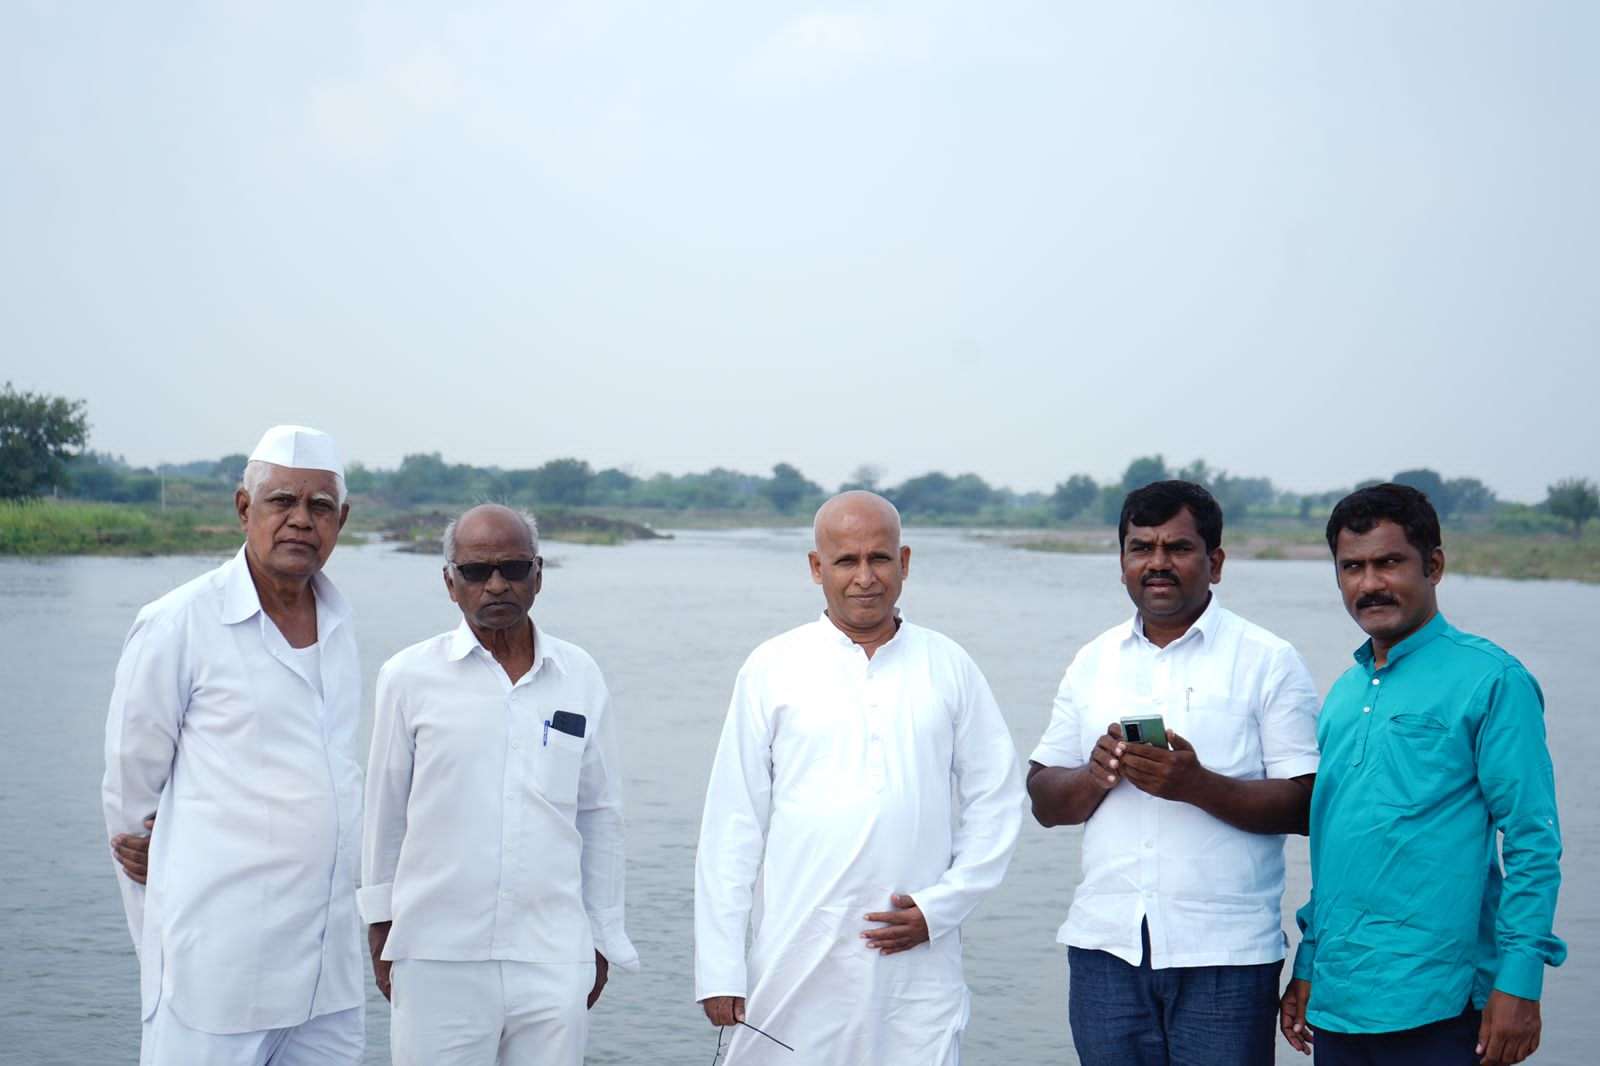 Ghongade (second from left) and some members of the team of experts and locals who helped revive the Manganga river.